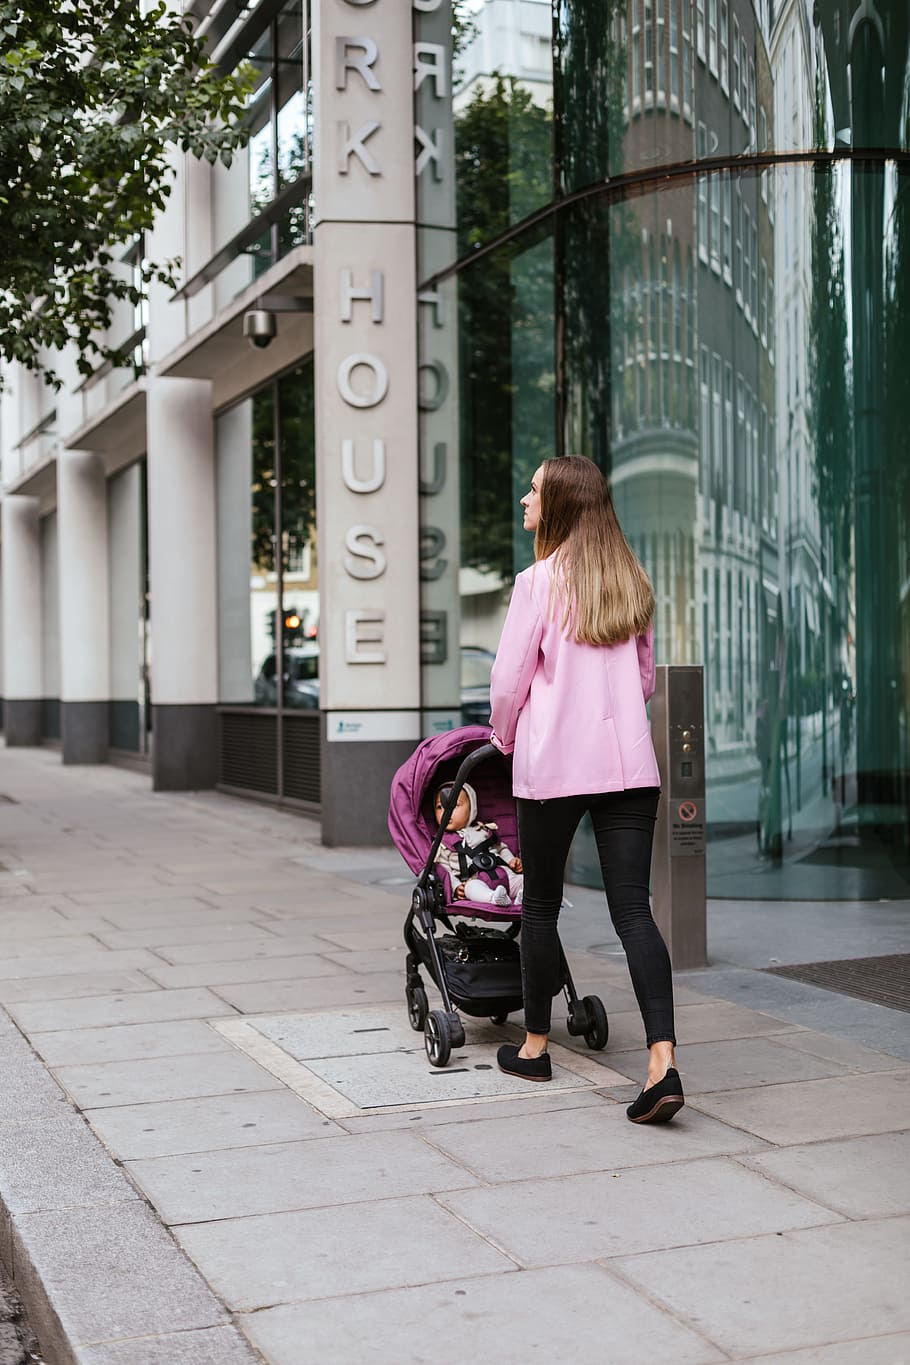 woman walking with child inside stroller, female, baby, building